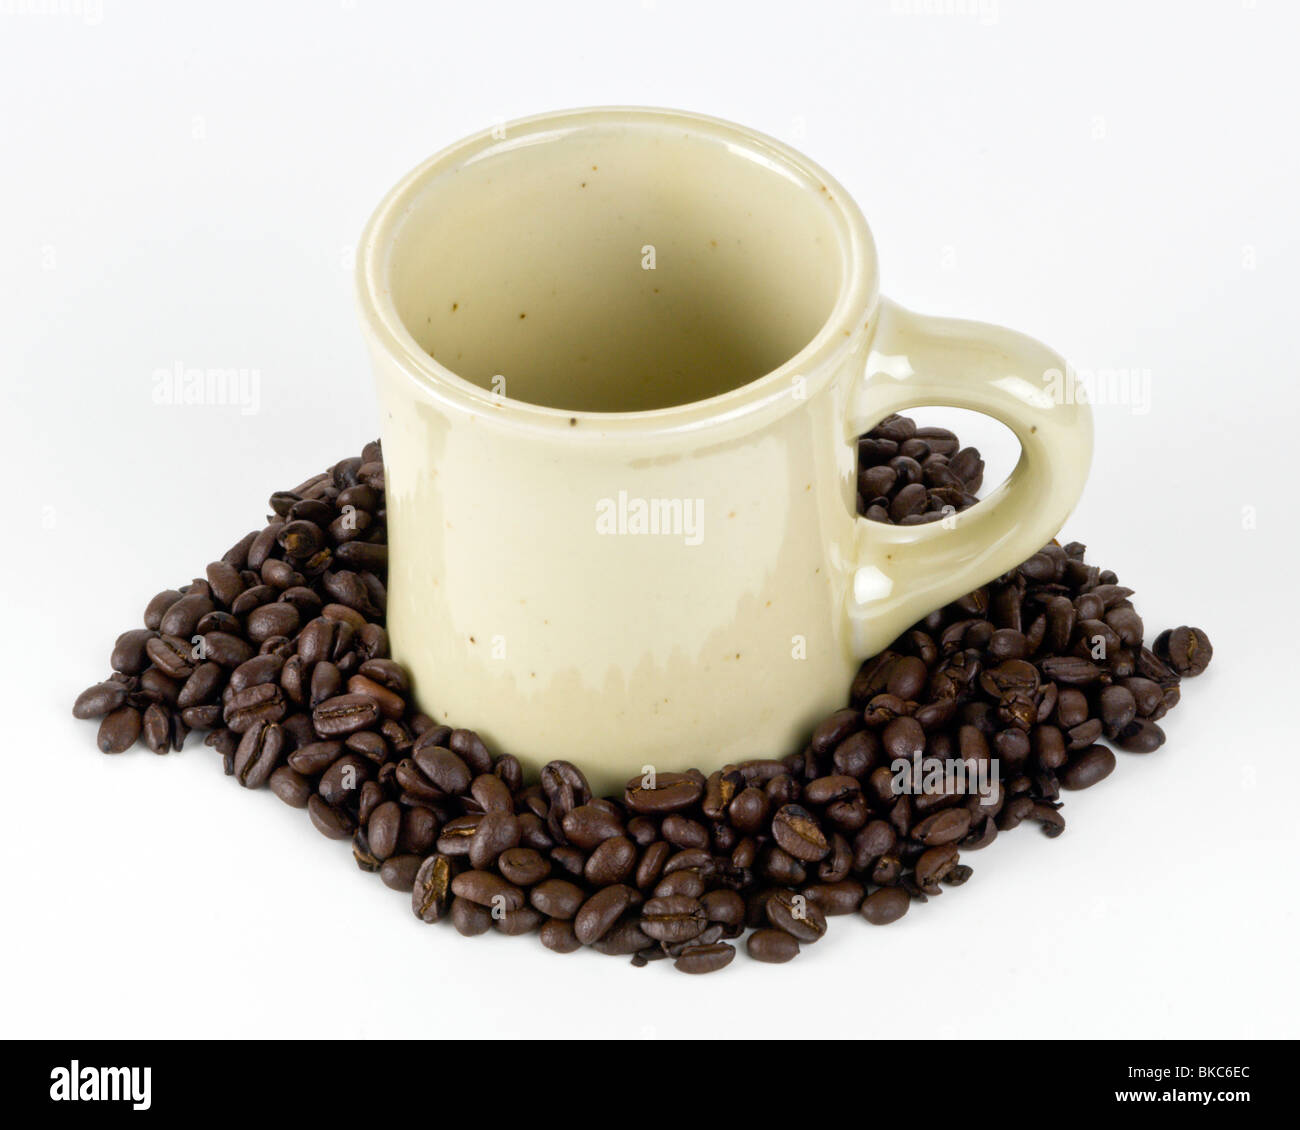 Looking into iconic Coffee Mug in coffee beans on white background Stock Photo